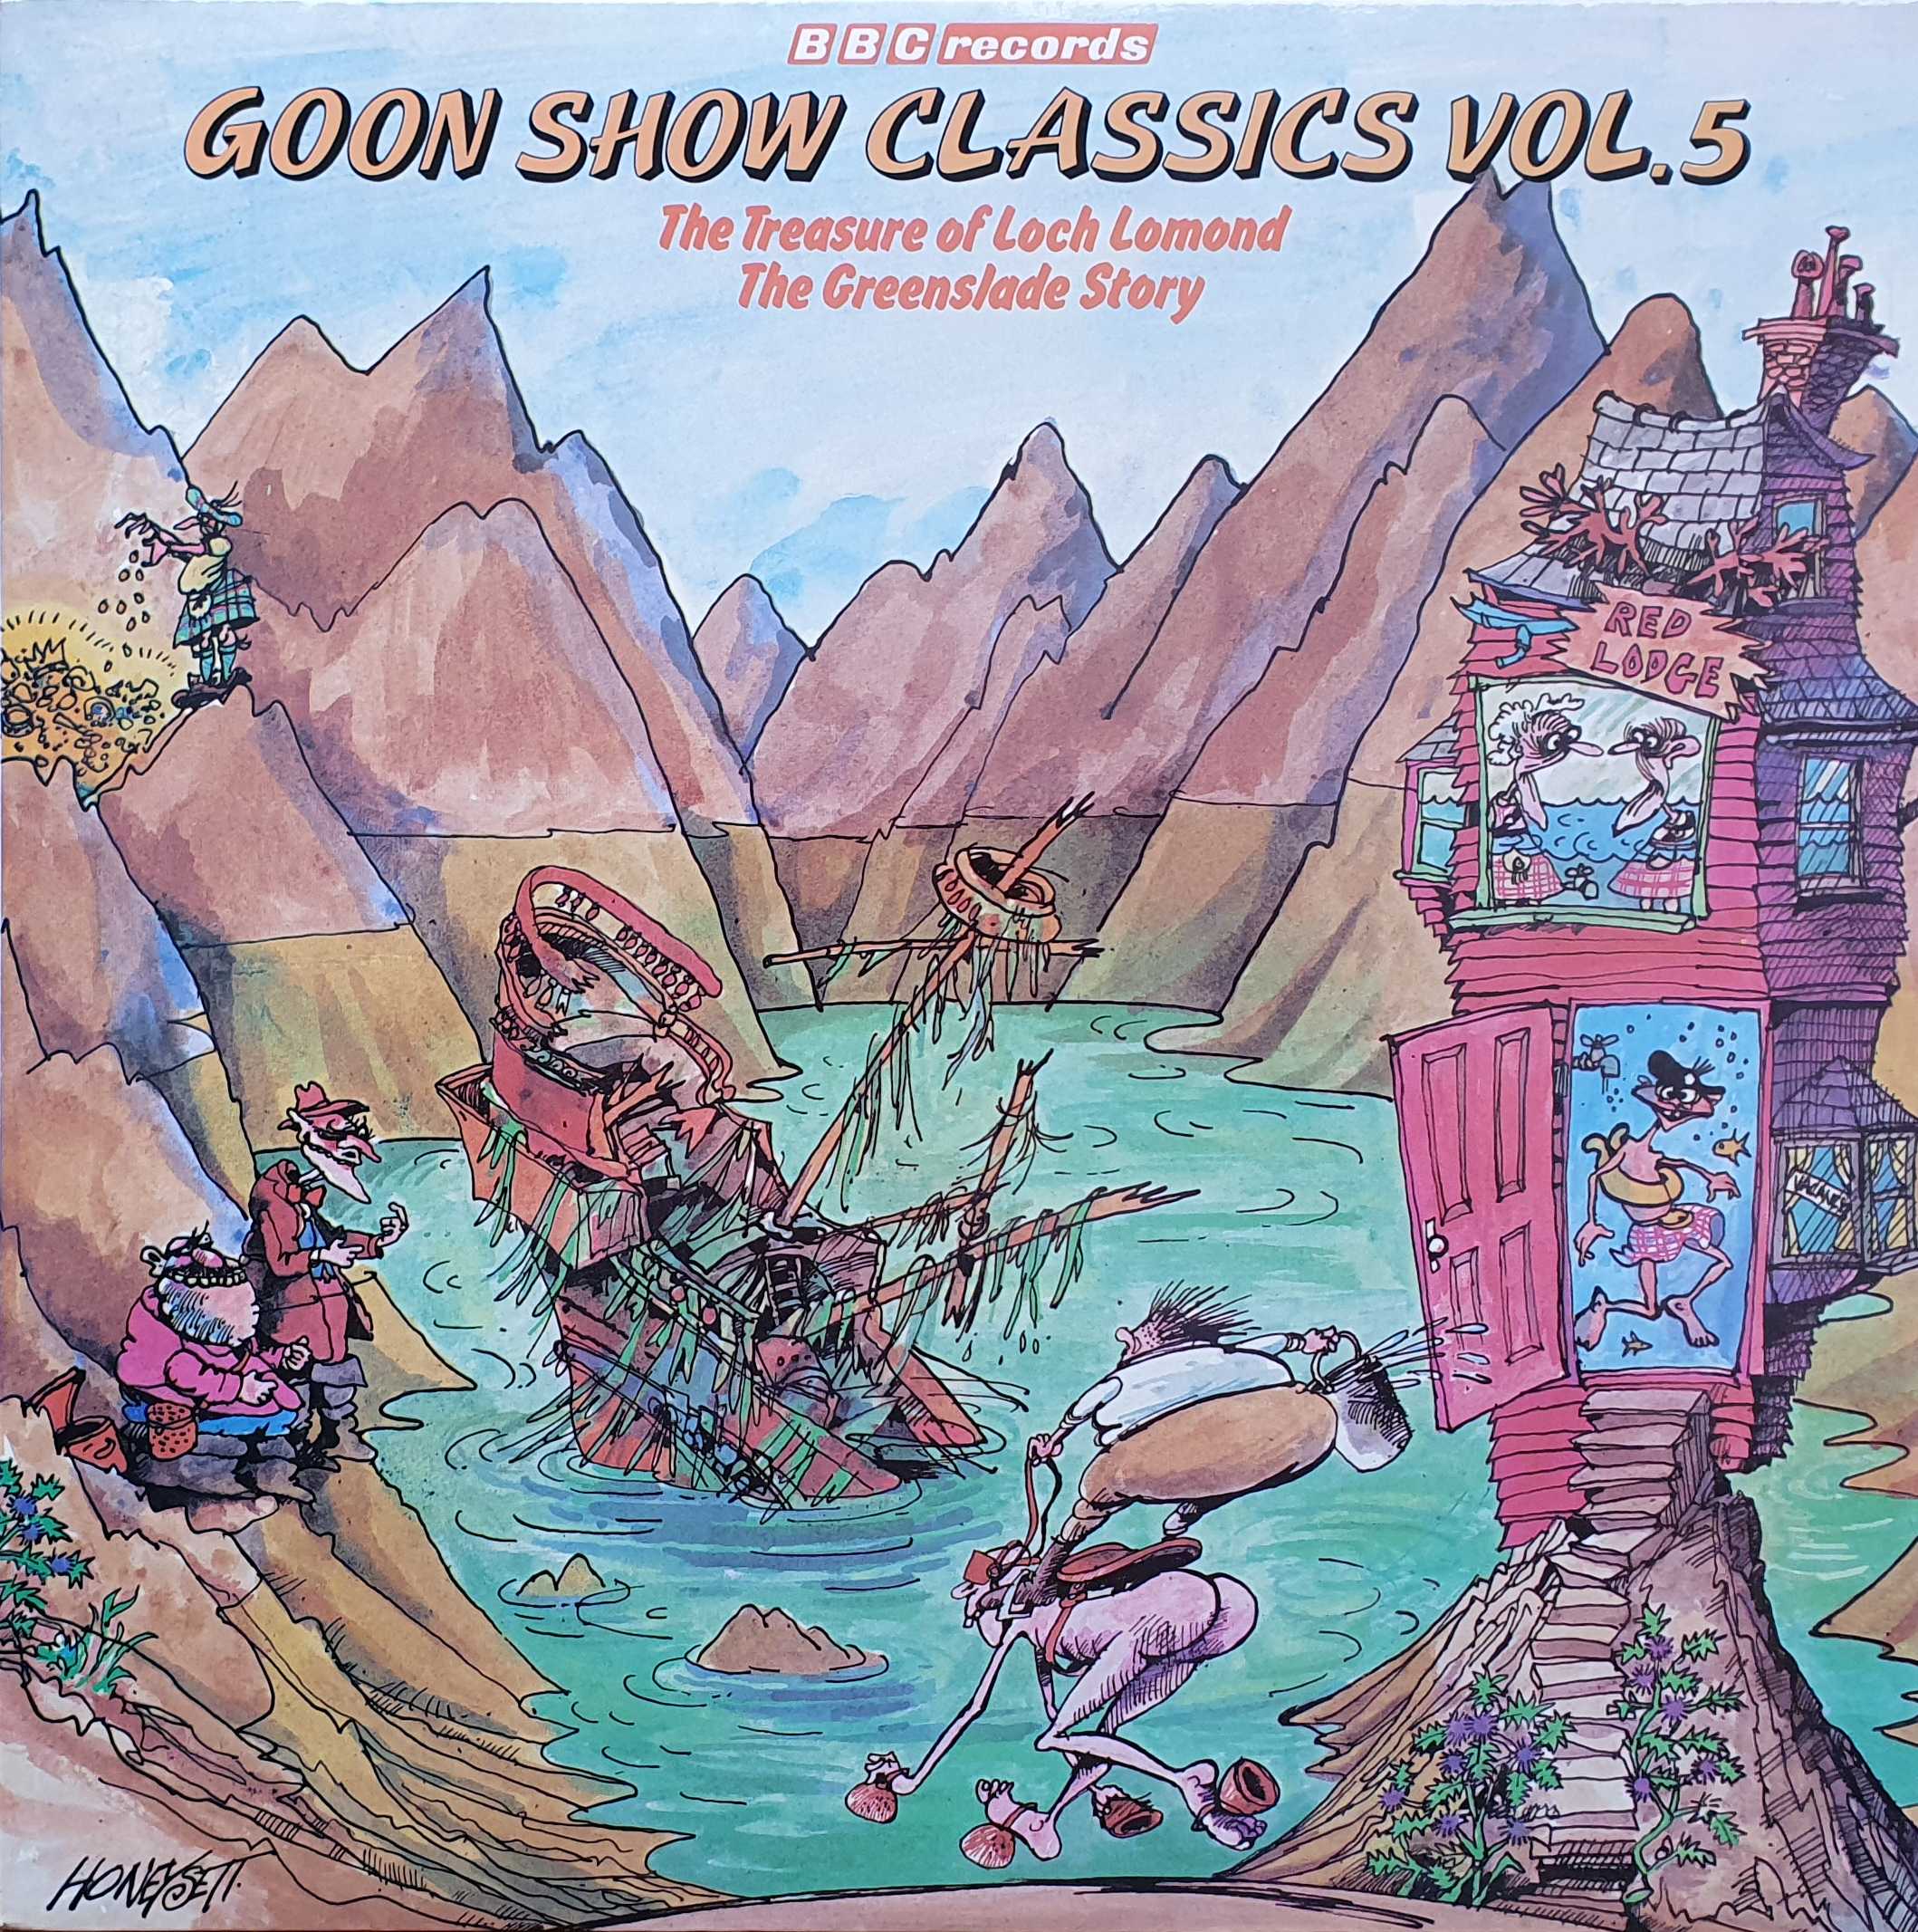 Picture of Goon Show classics vol. 5 by artist The Goon Show from the BBC albums - Records and Tapes library